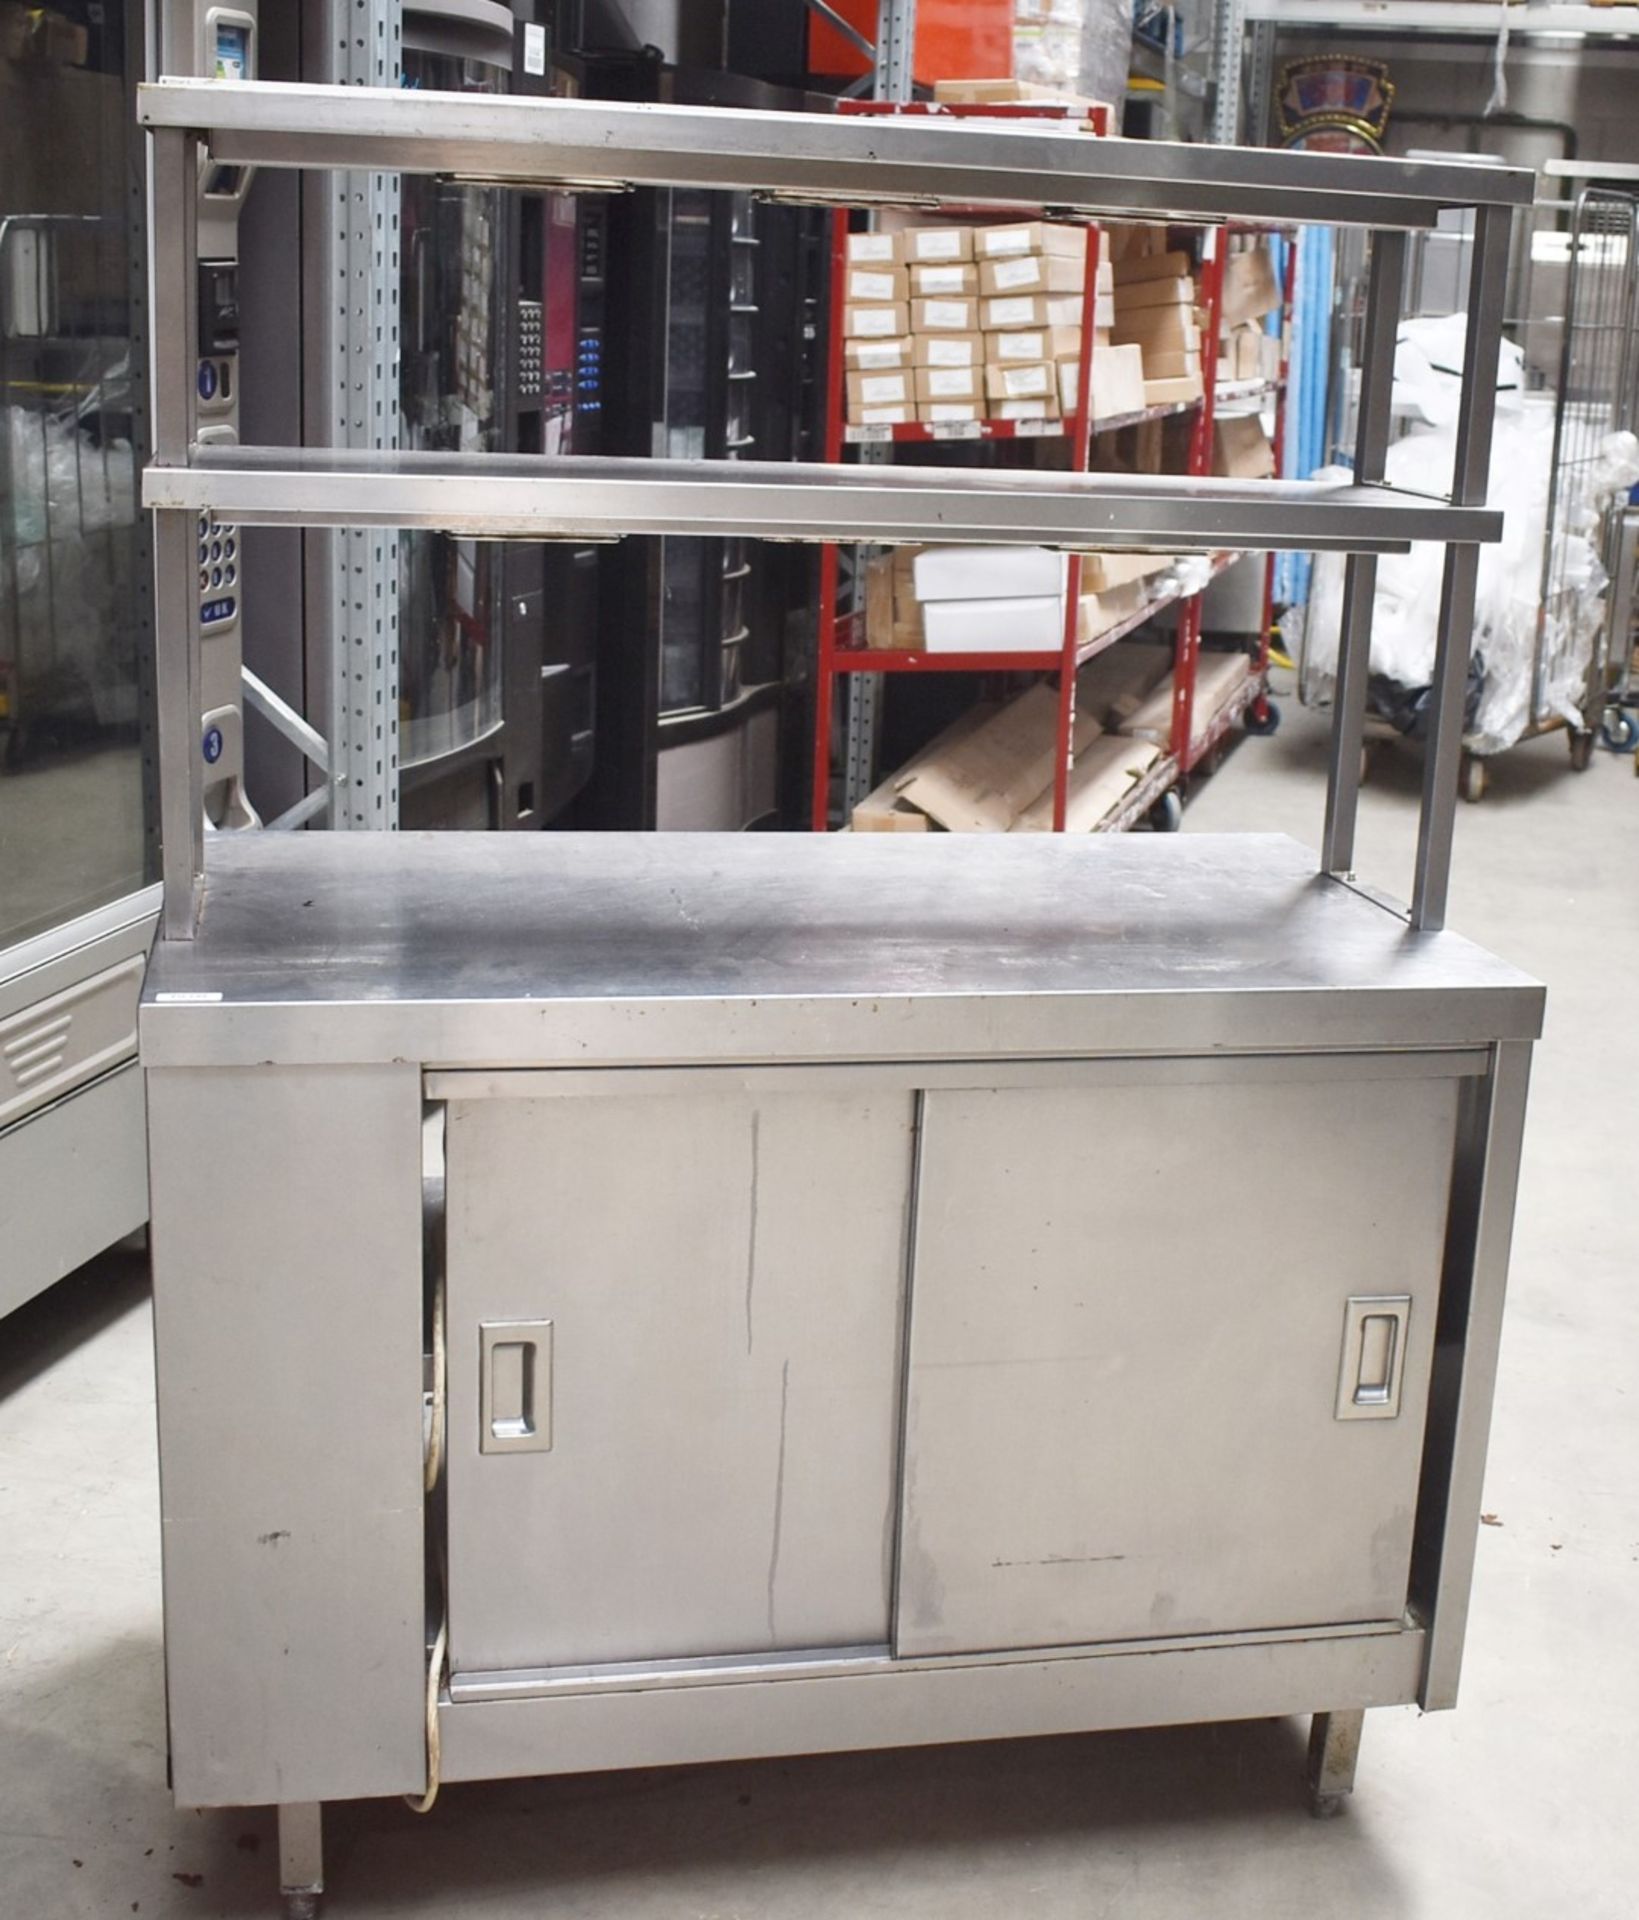 1 x Stainless Steel Hot Cabinet With Overhead Heated Passthrough Shelves and Order Ticket Rail